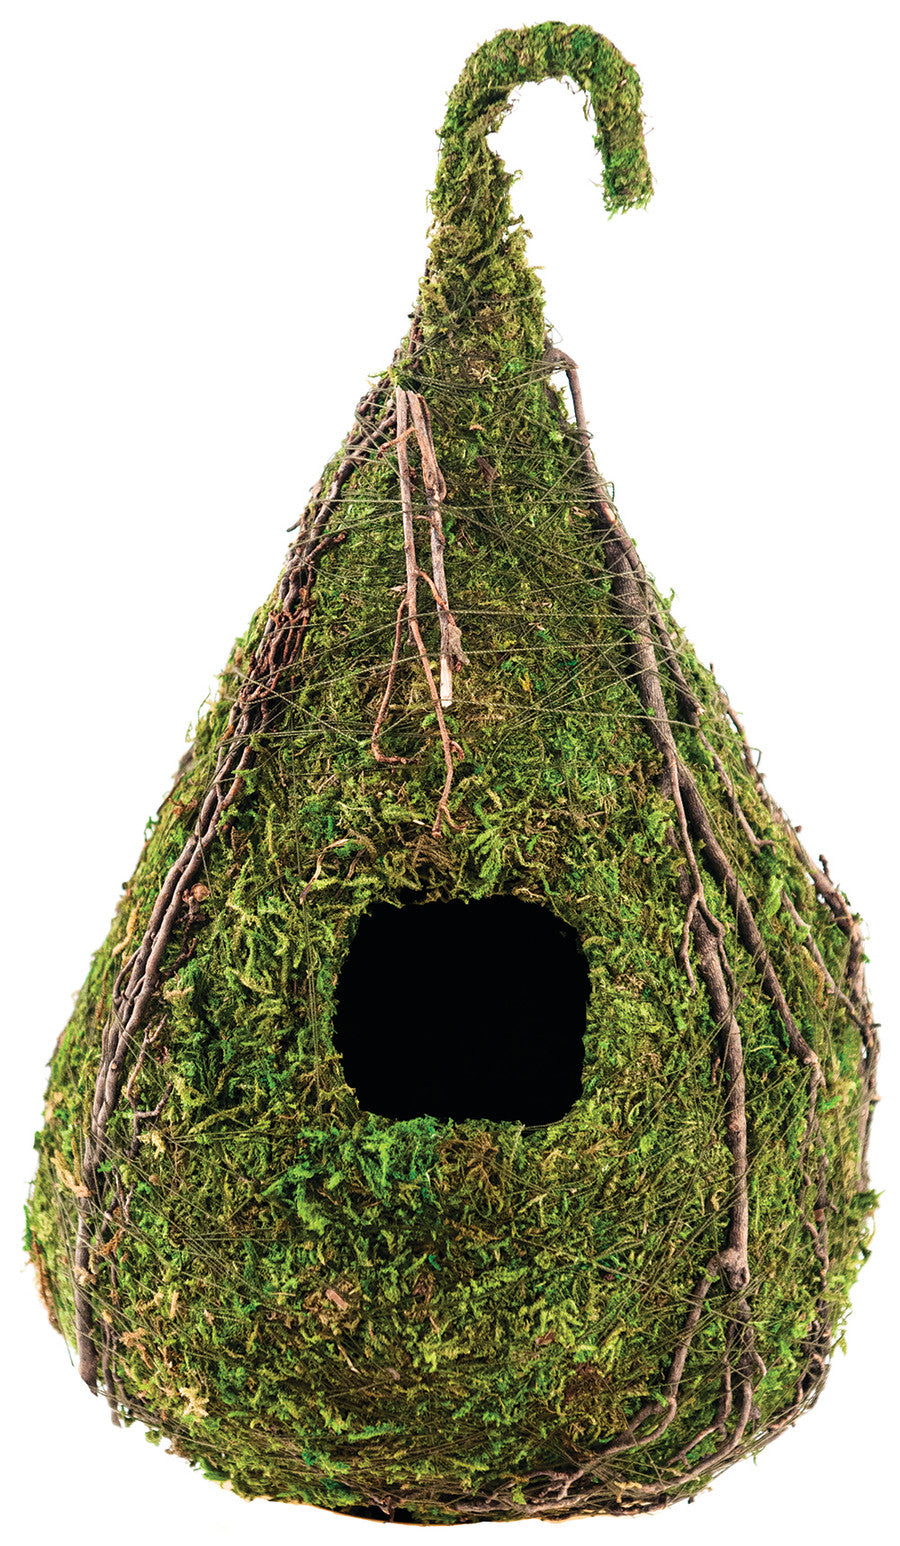 A raindrop-shaped birdhouse made of moss. There is a small hole in the center.